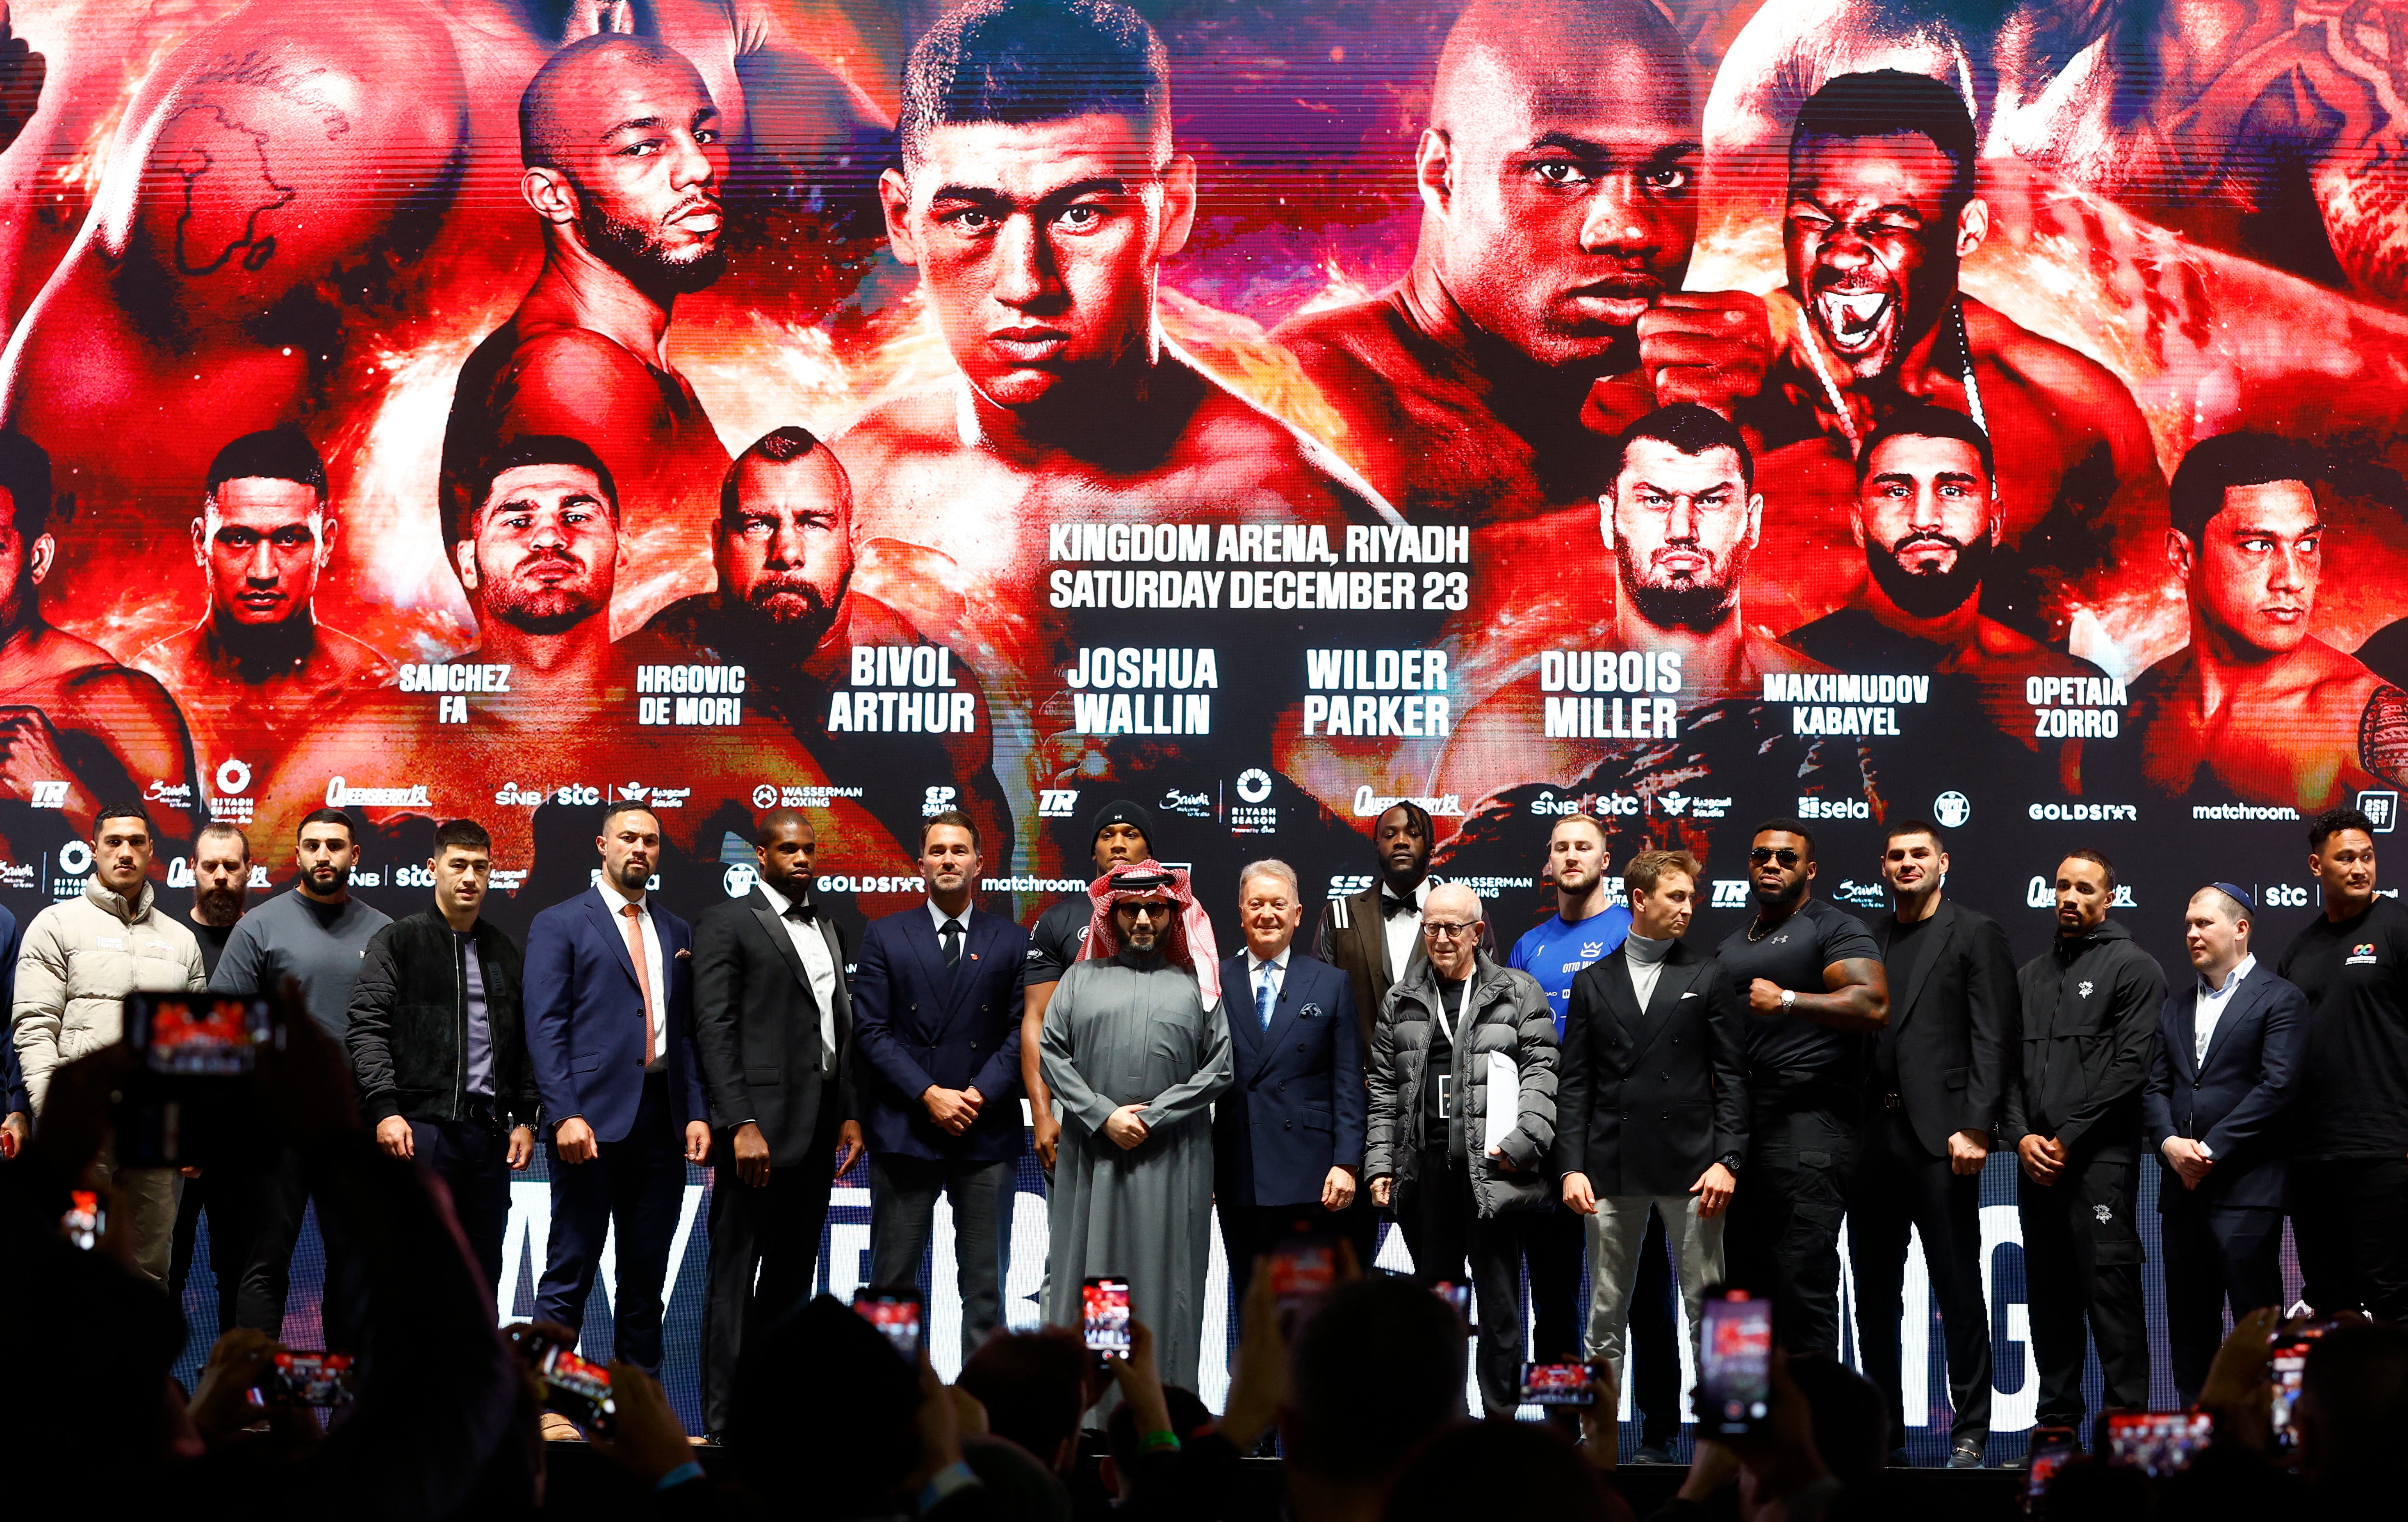 The press conference marked an astonishing gathering of fighters and promoters